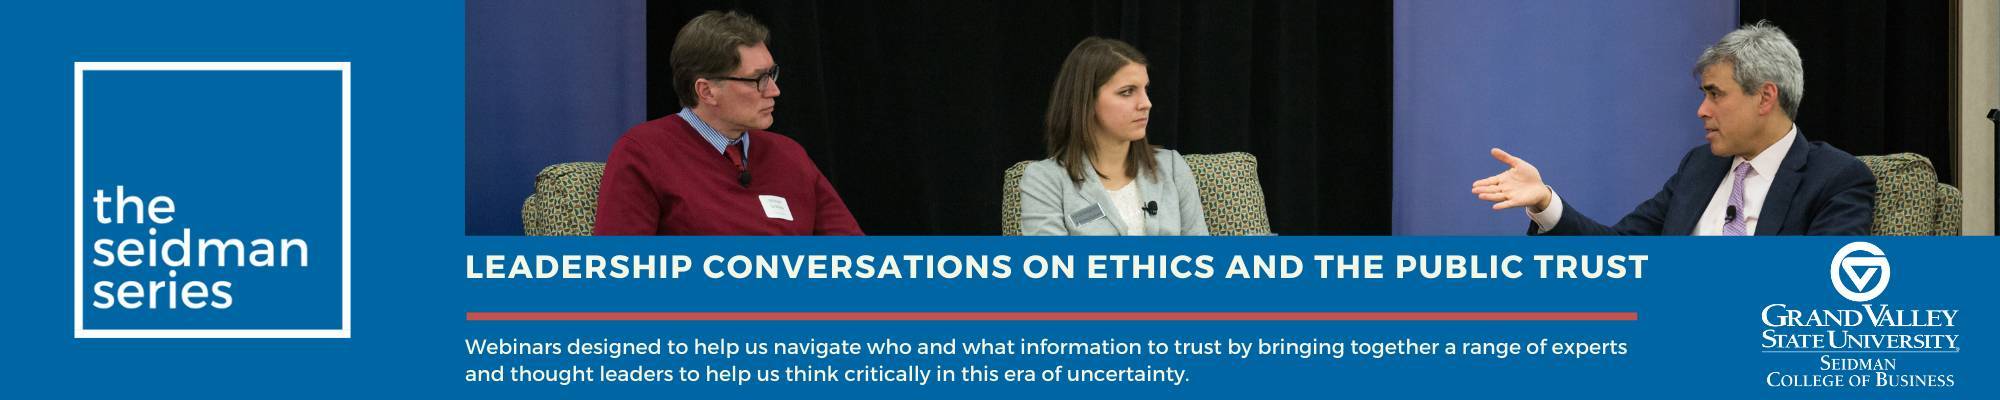 The Seidman Series - Leadership conversations on ethics and the public trust. Webinars designed to help us navigate who and what information to trust by bringing together a range of experts and thought leaders to help us think critically in this era of uncertainty.